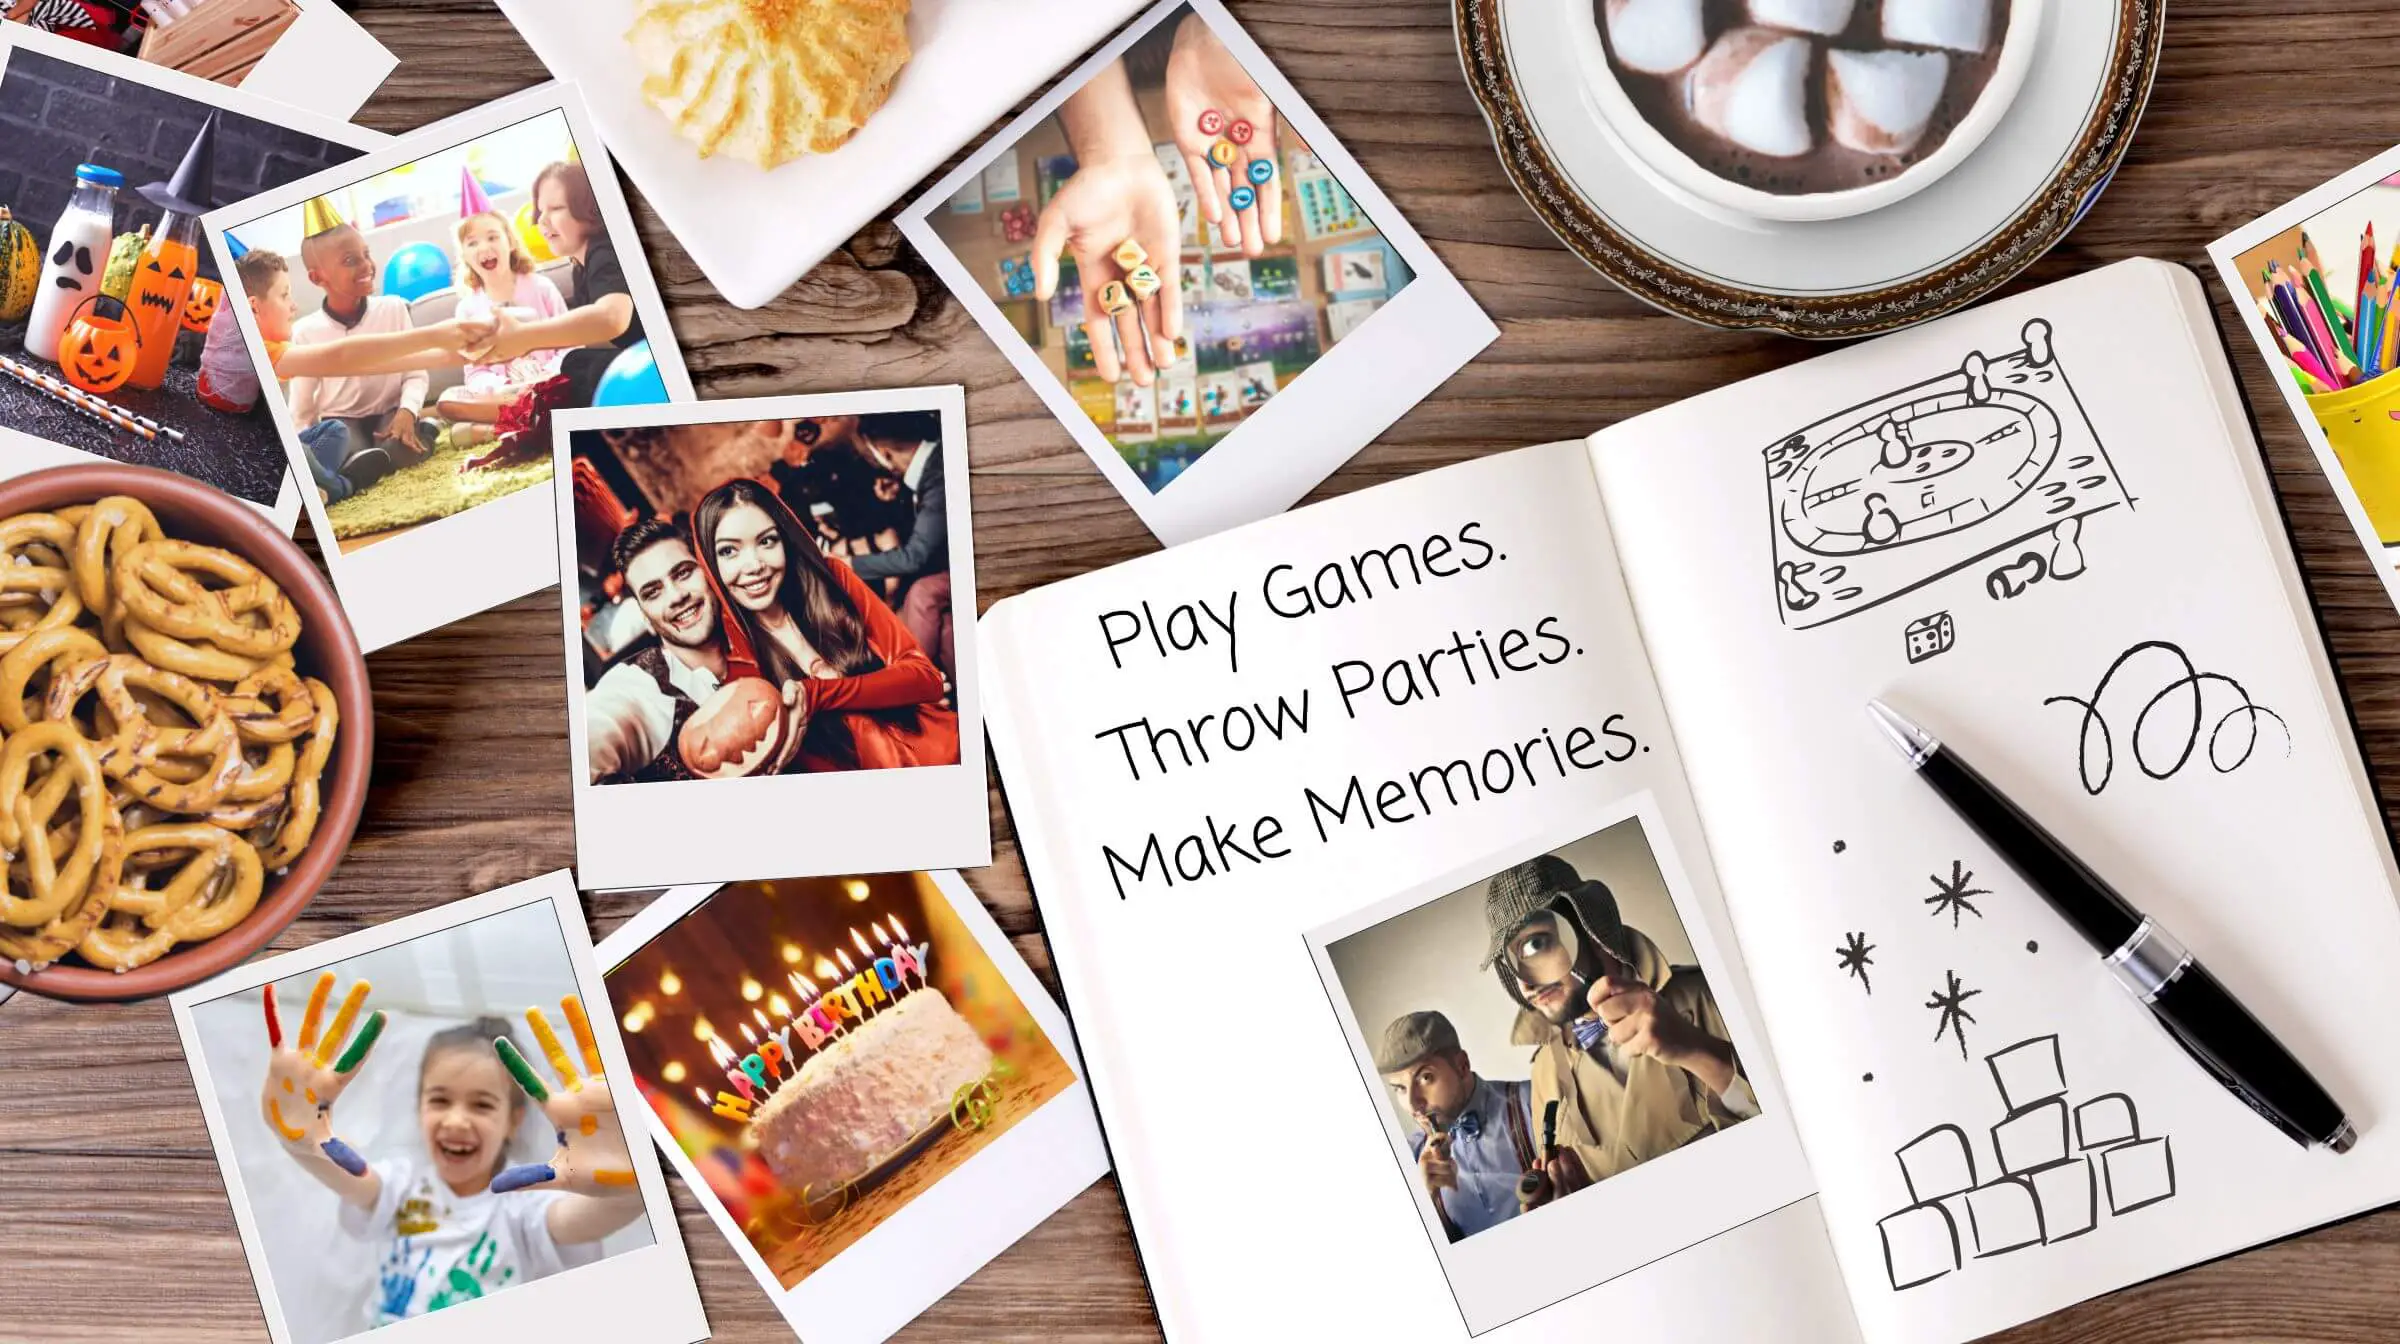 "Play Games. Throw Parties. Make Memories."  A Table with a notebook featuring those words, plus scattered polaroid photos of various parties, crafts, and celebrations. 